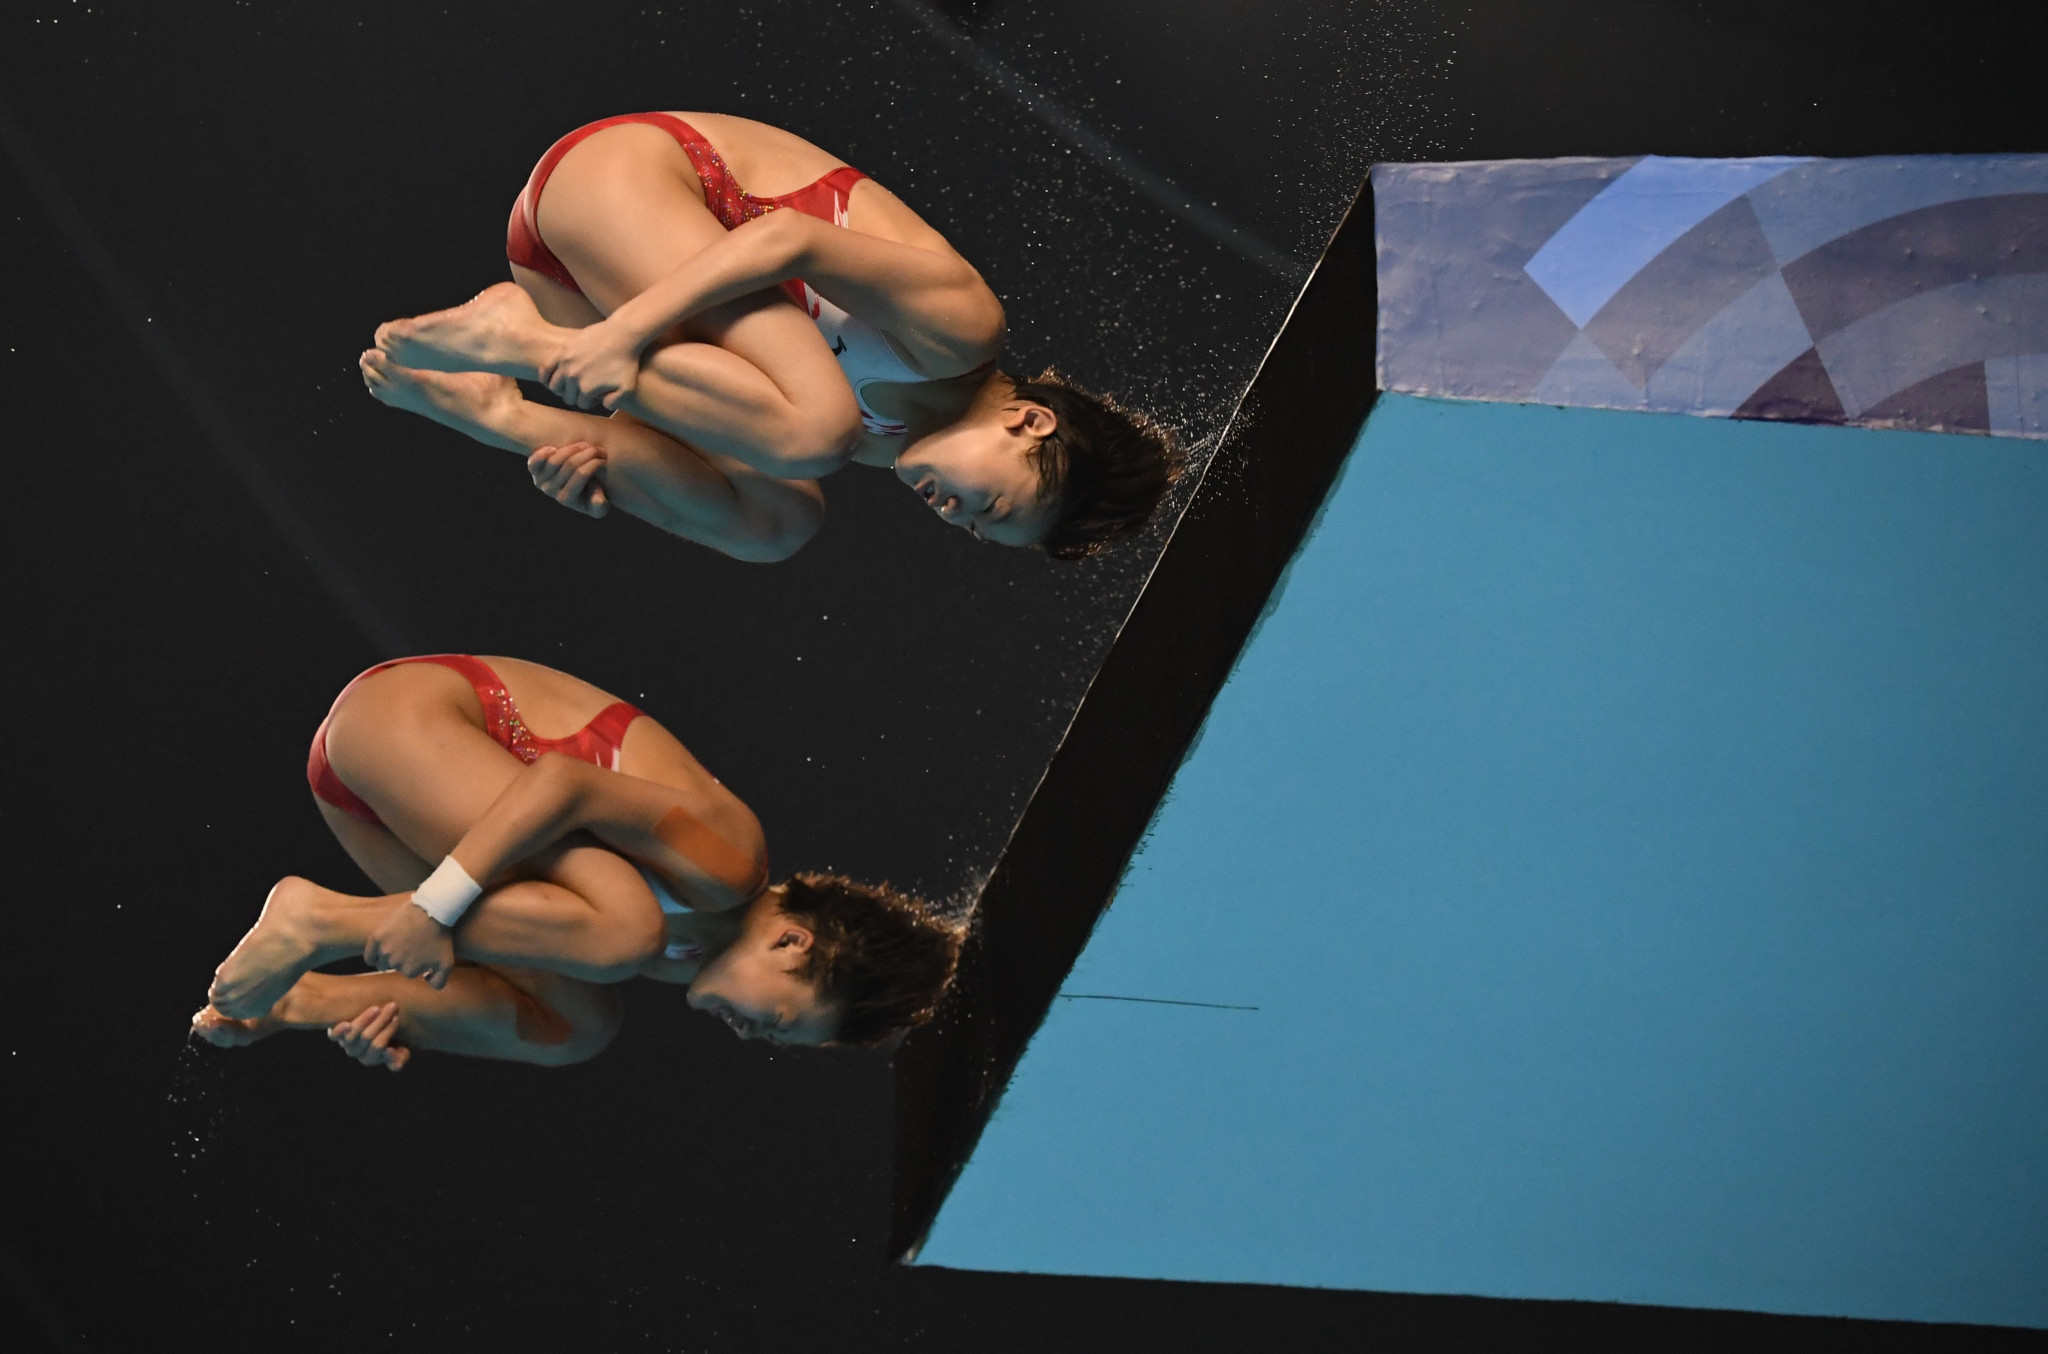 China lay down early marker with double gold on opening day of diving action at 2018 Asian Games